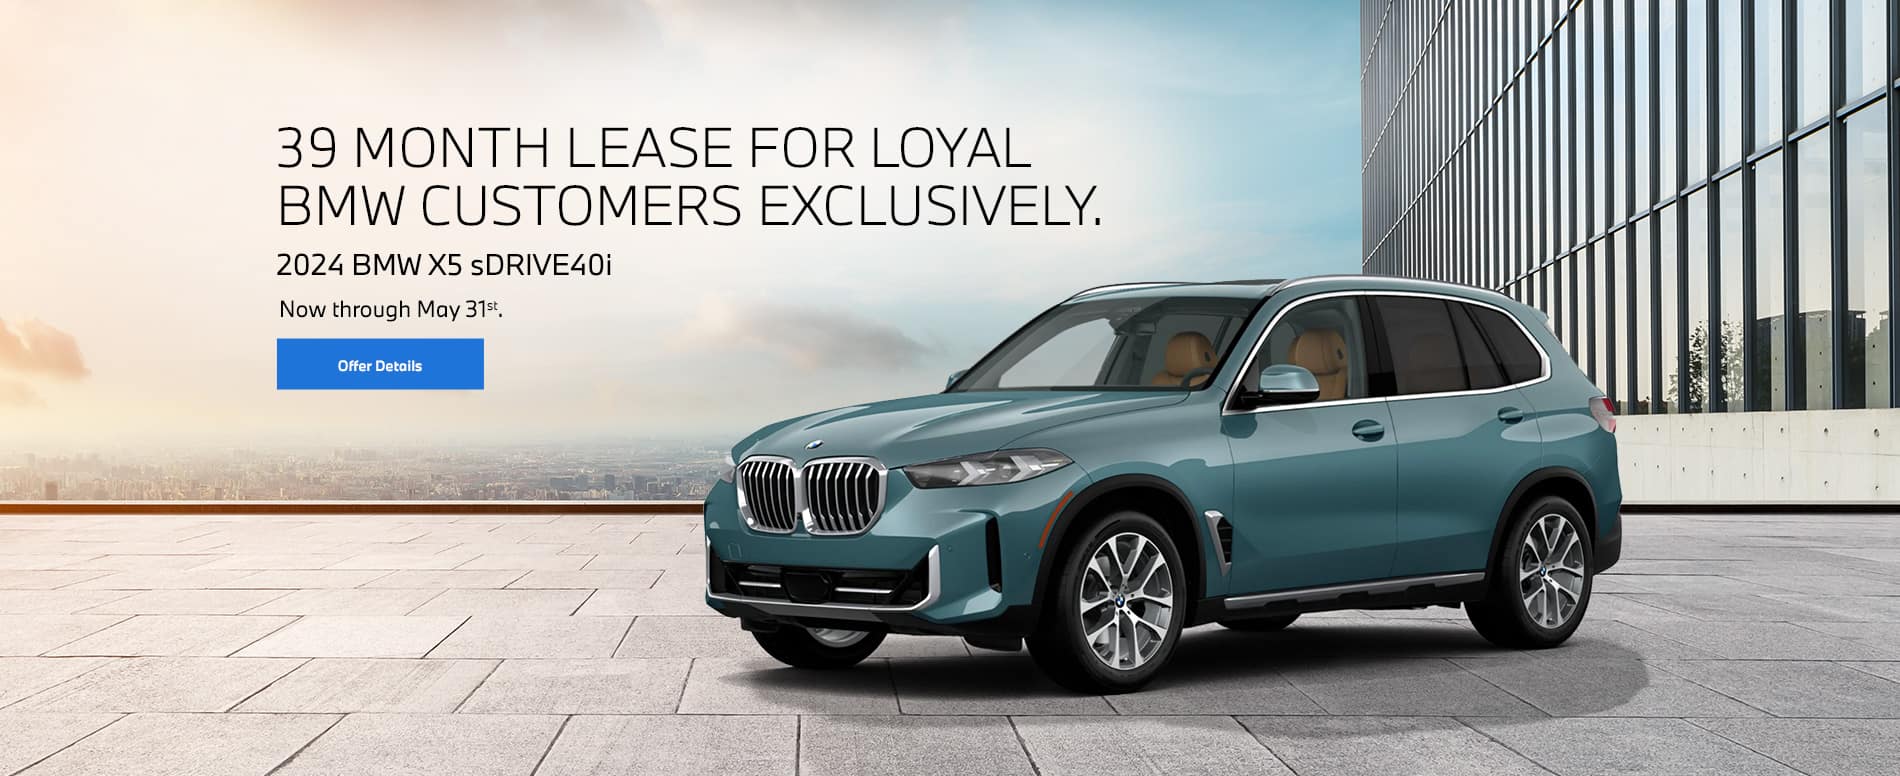 39 month lease for loyal BMW customers exclusively